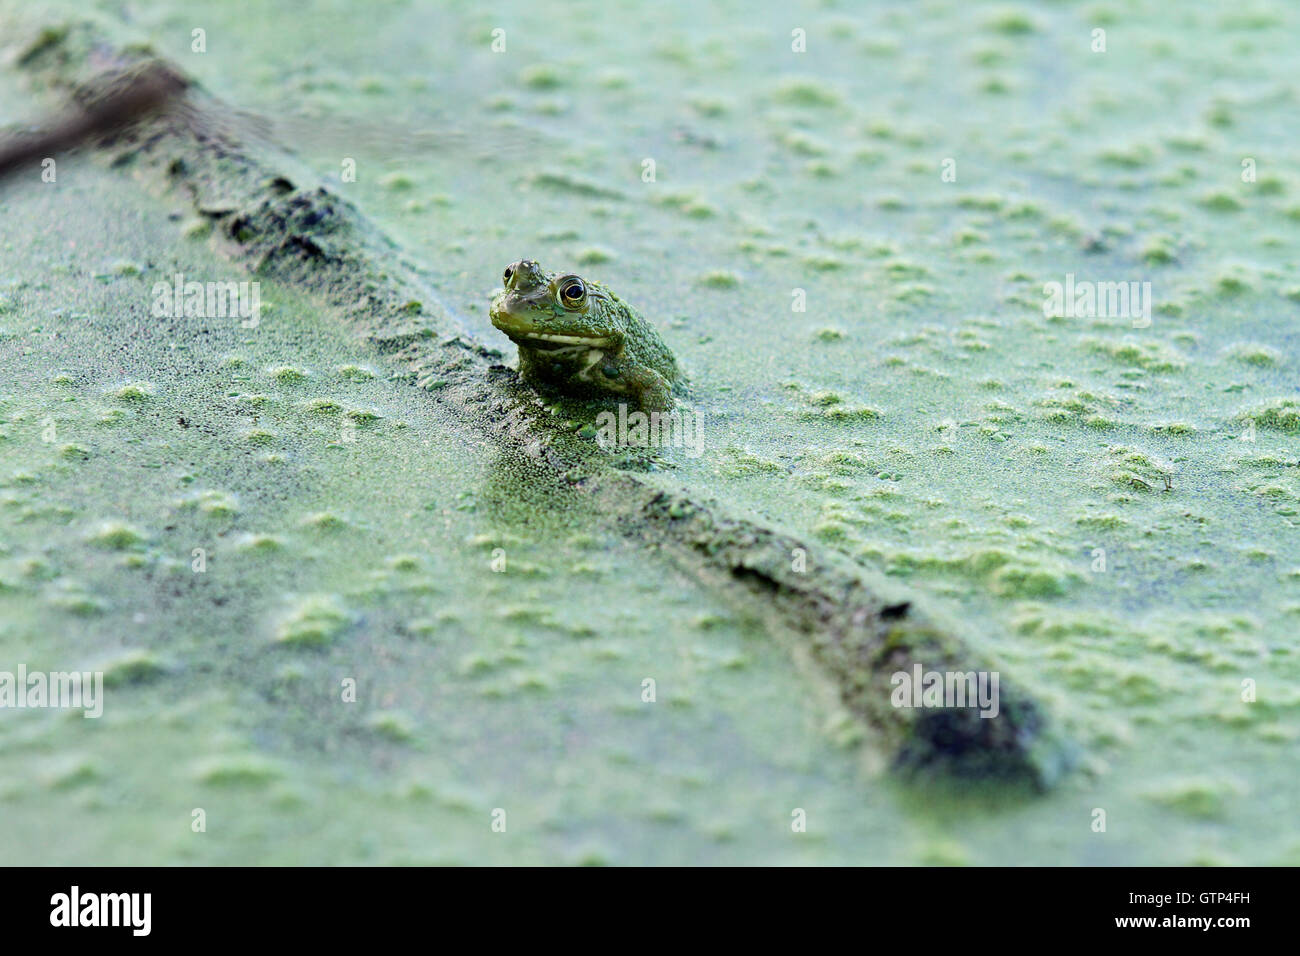 North American bullfrog (Rana catesbeiana) protruding from a pond of algae while resting against a dead floating log Stock Photo